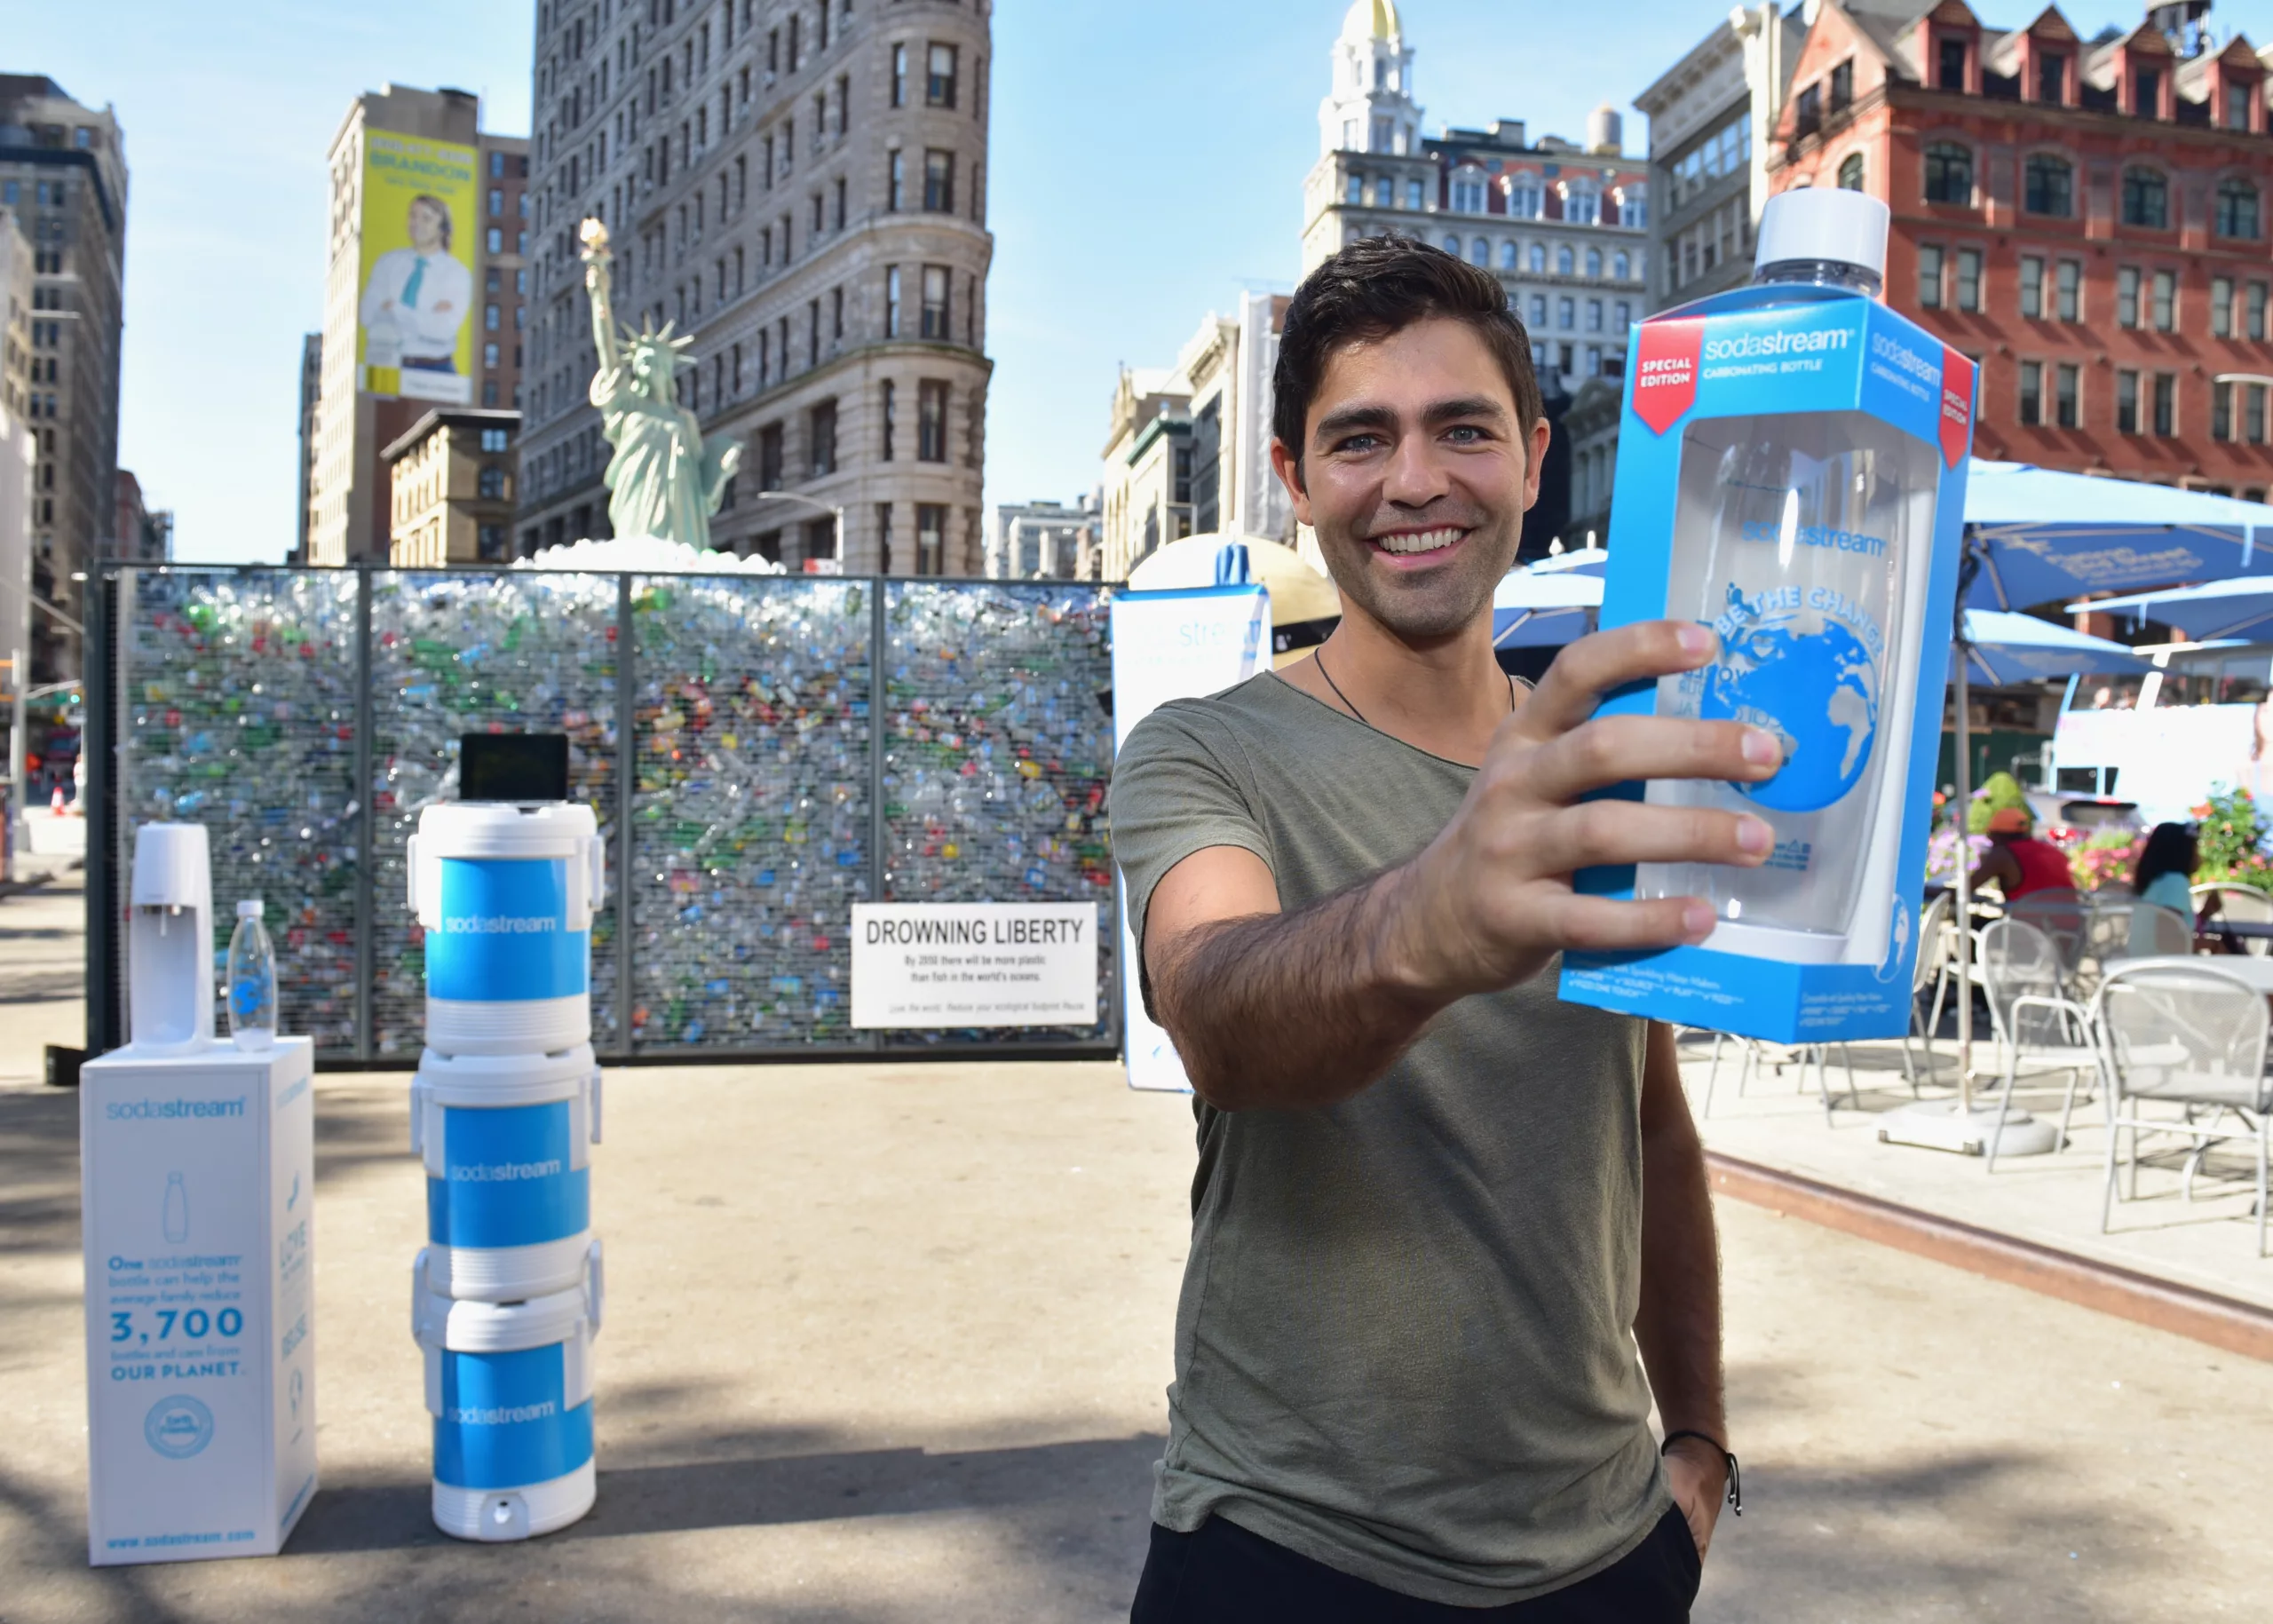 Man smiling with SodaStream bottle in front of recycling exhibit